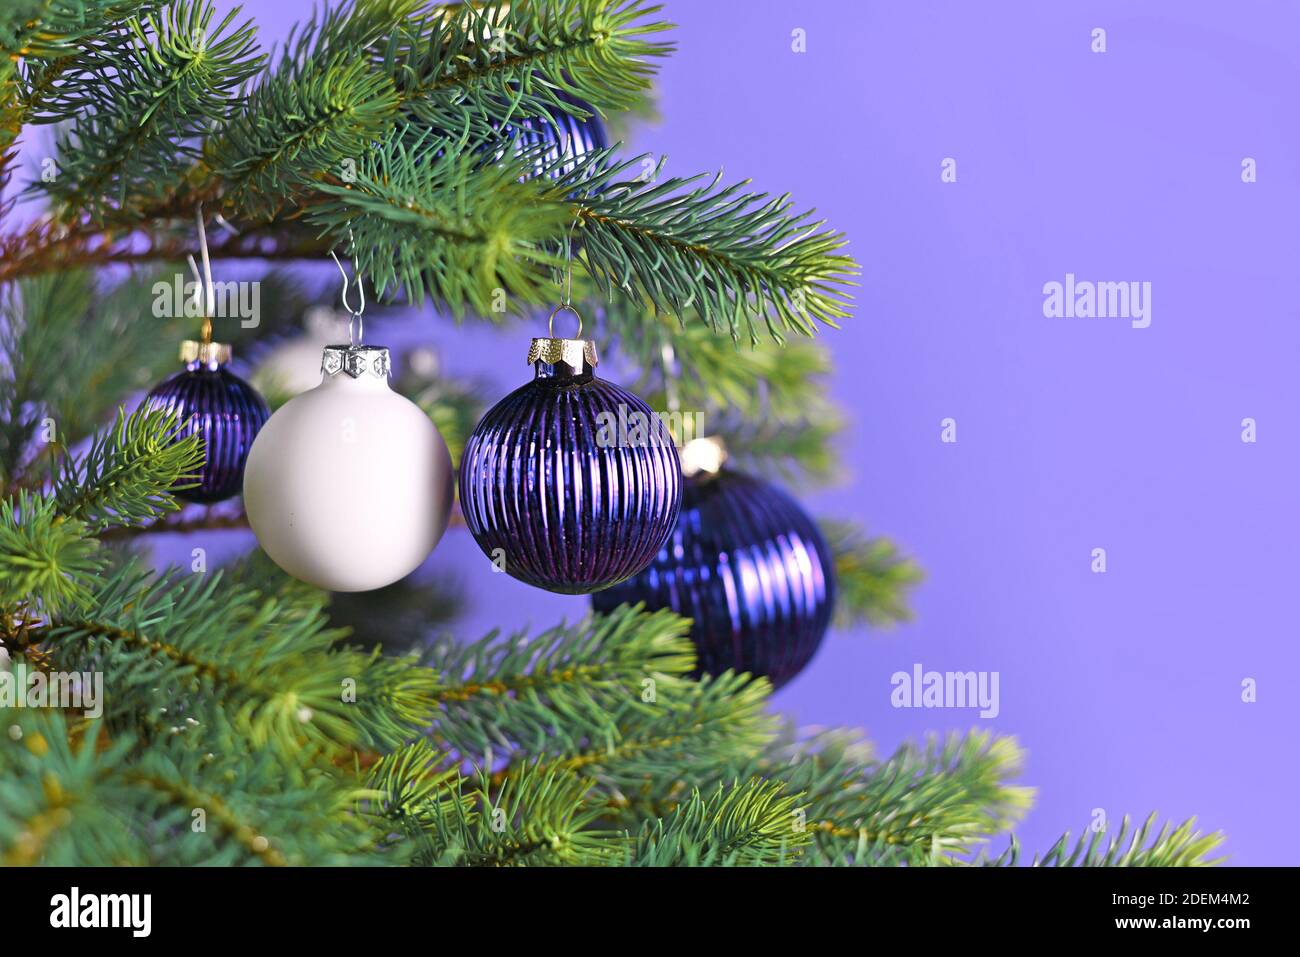 Purple and white decorative glass baubles hanging from Christmas tree branch on violet background with copy space Stock Photo